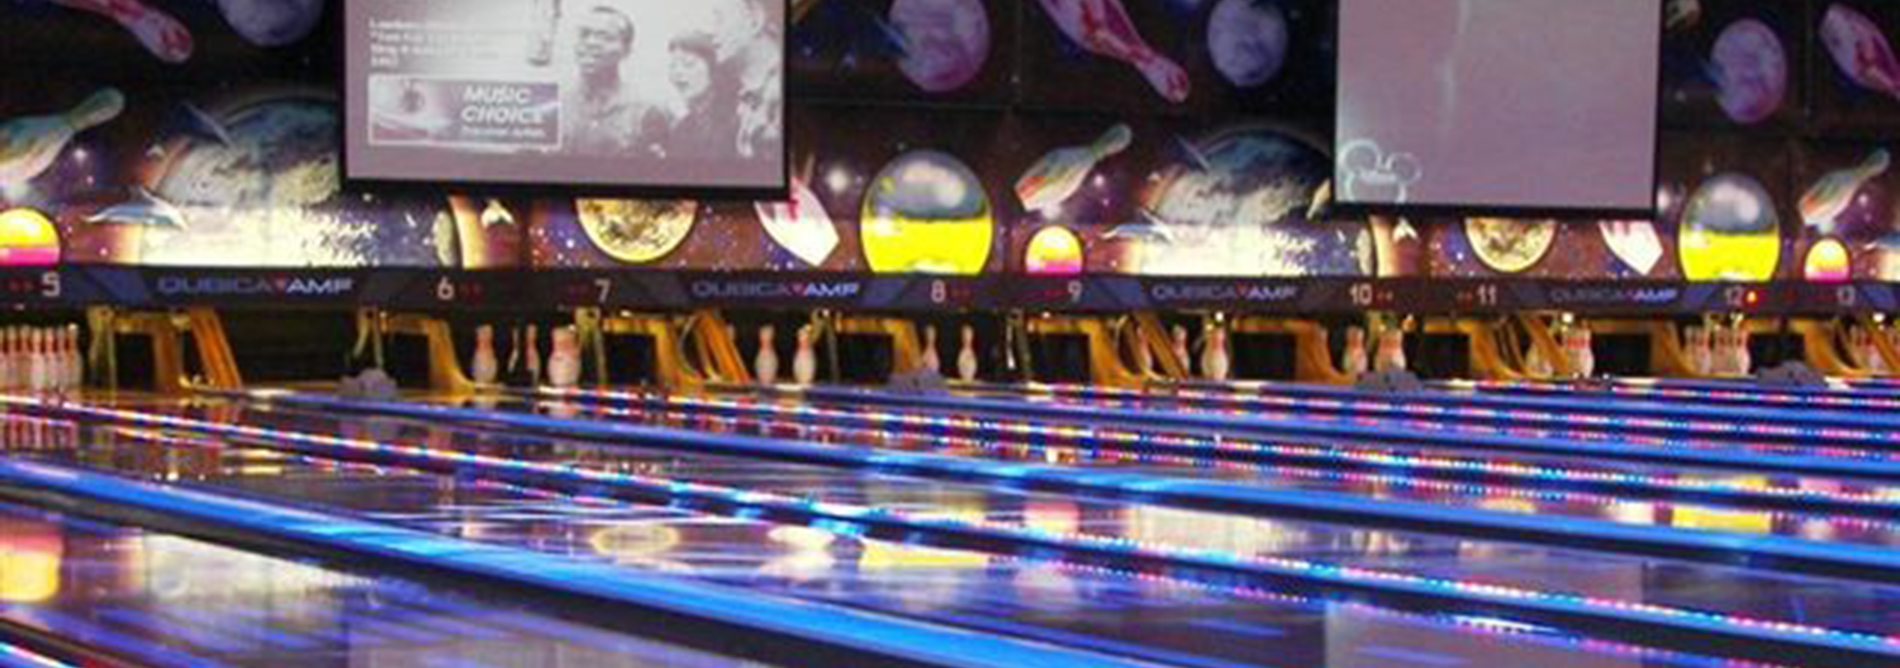 QUBICAAMF-bowling-Family-Entertainment-Center-Planet-Fun-banner.jpg